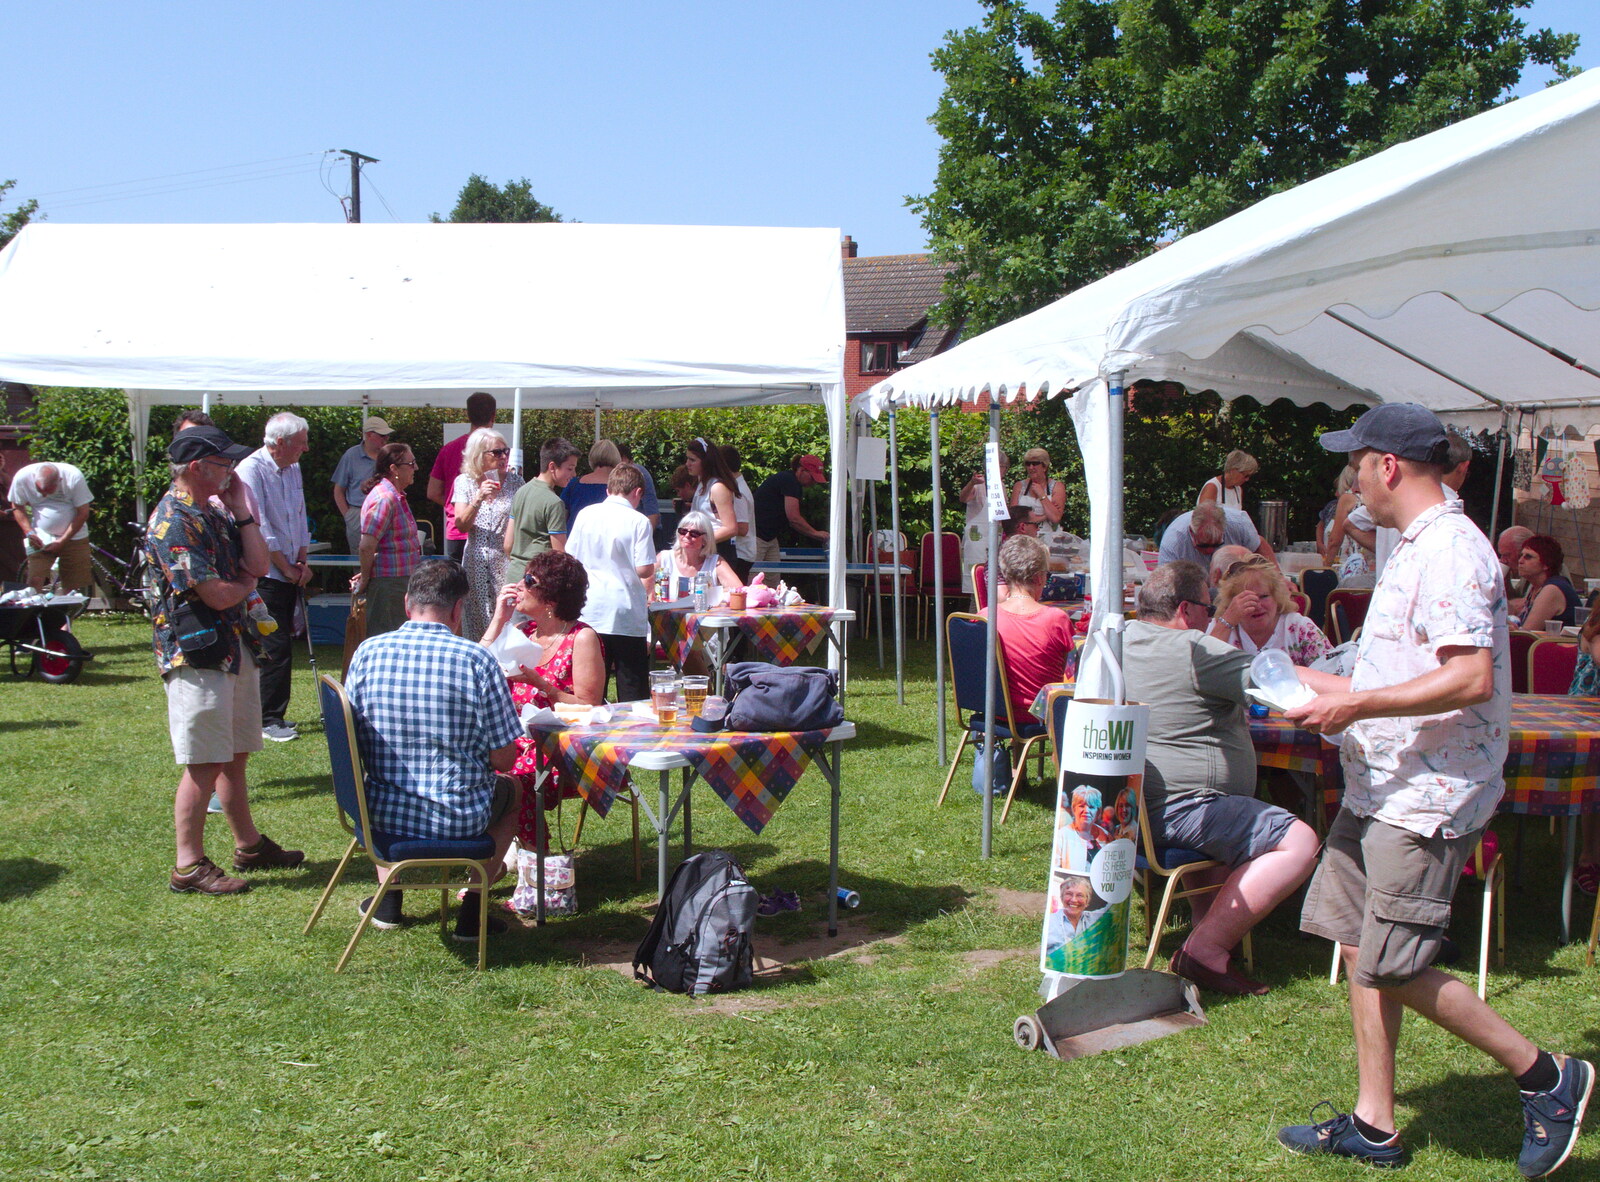 Fete crowds from GSB and the Gislingham Fete, Suffolk - 29th June 2019